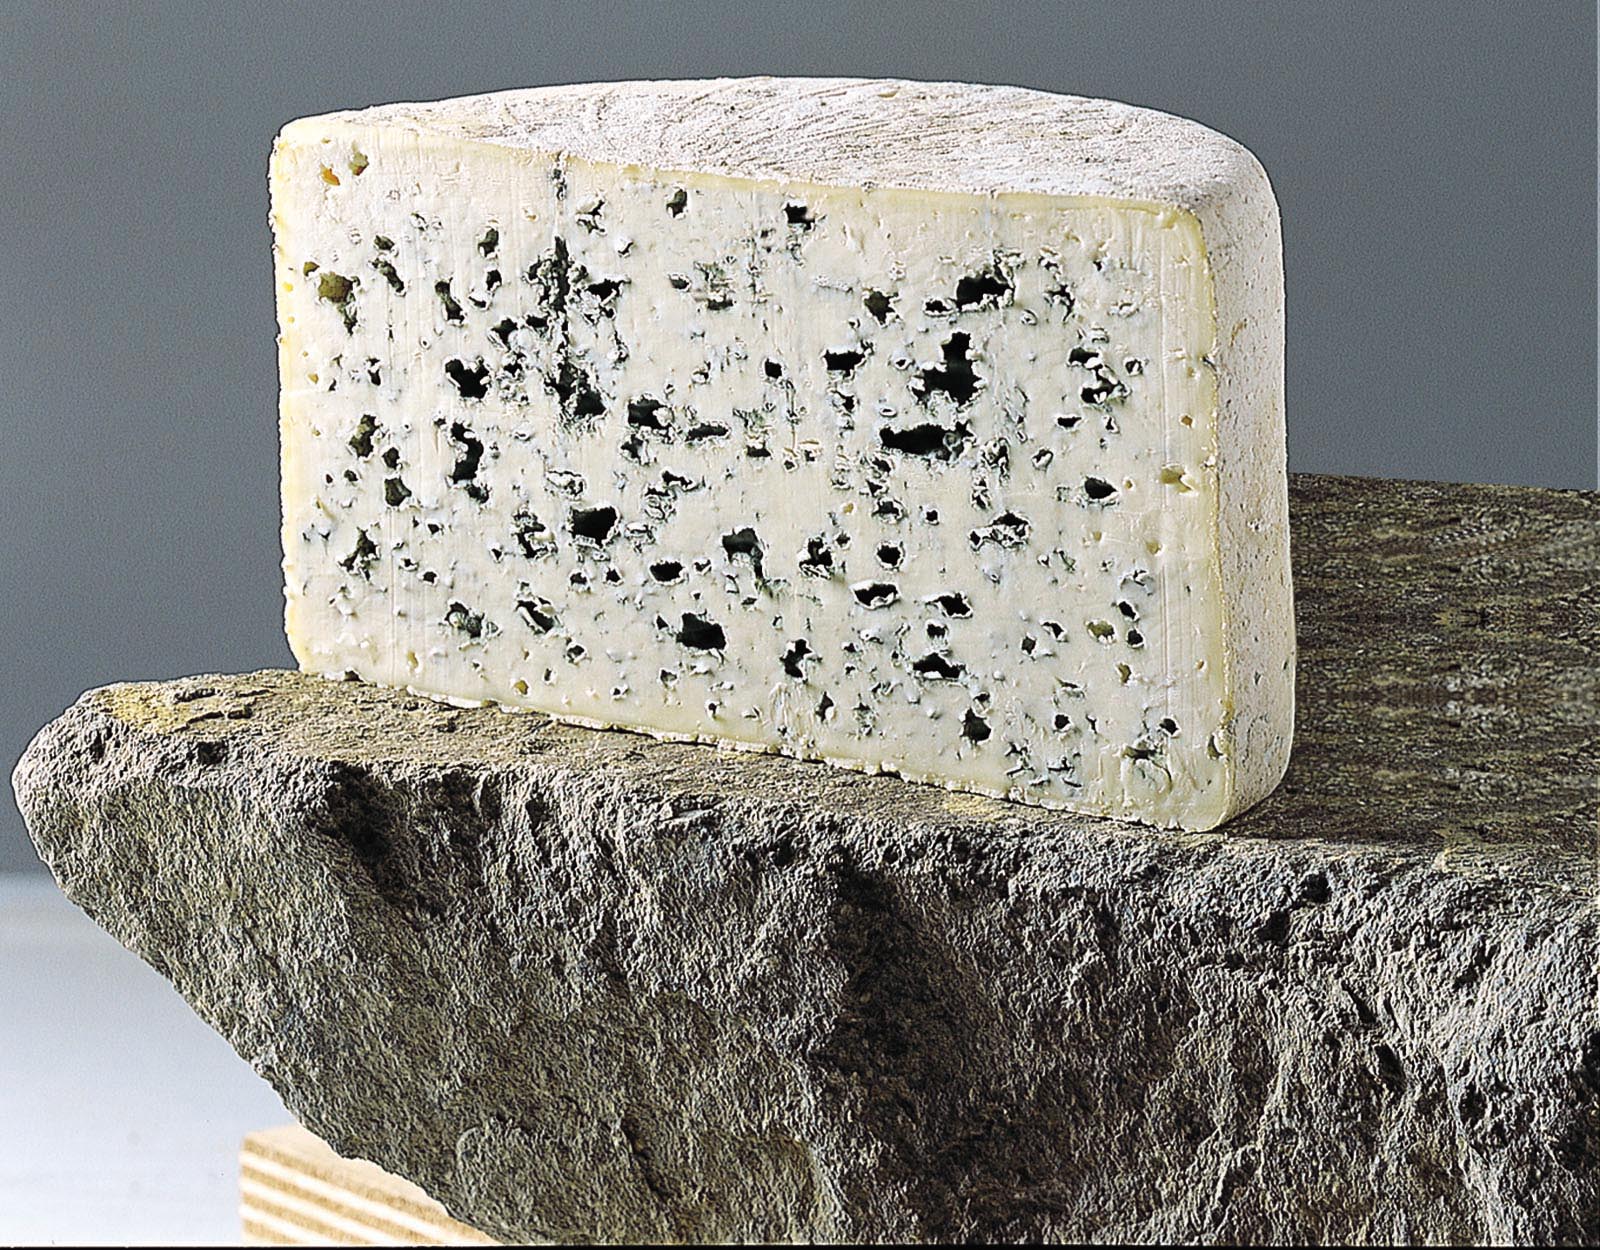 High Resolution Images of Cheese